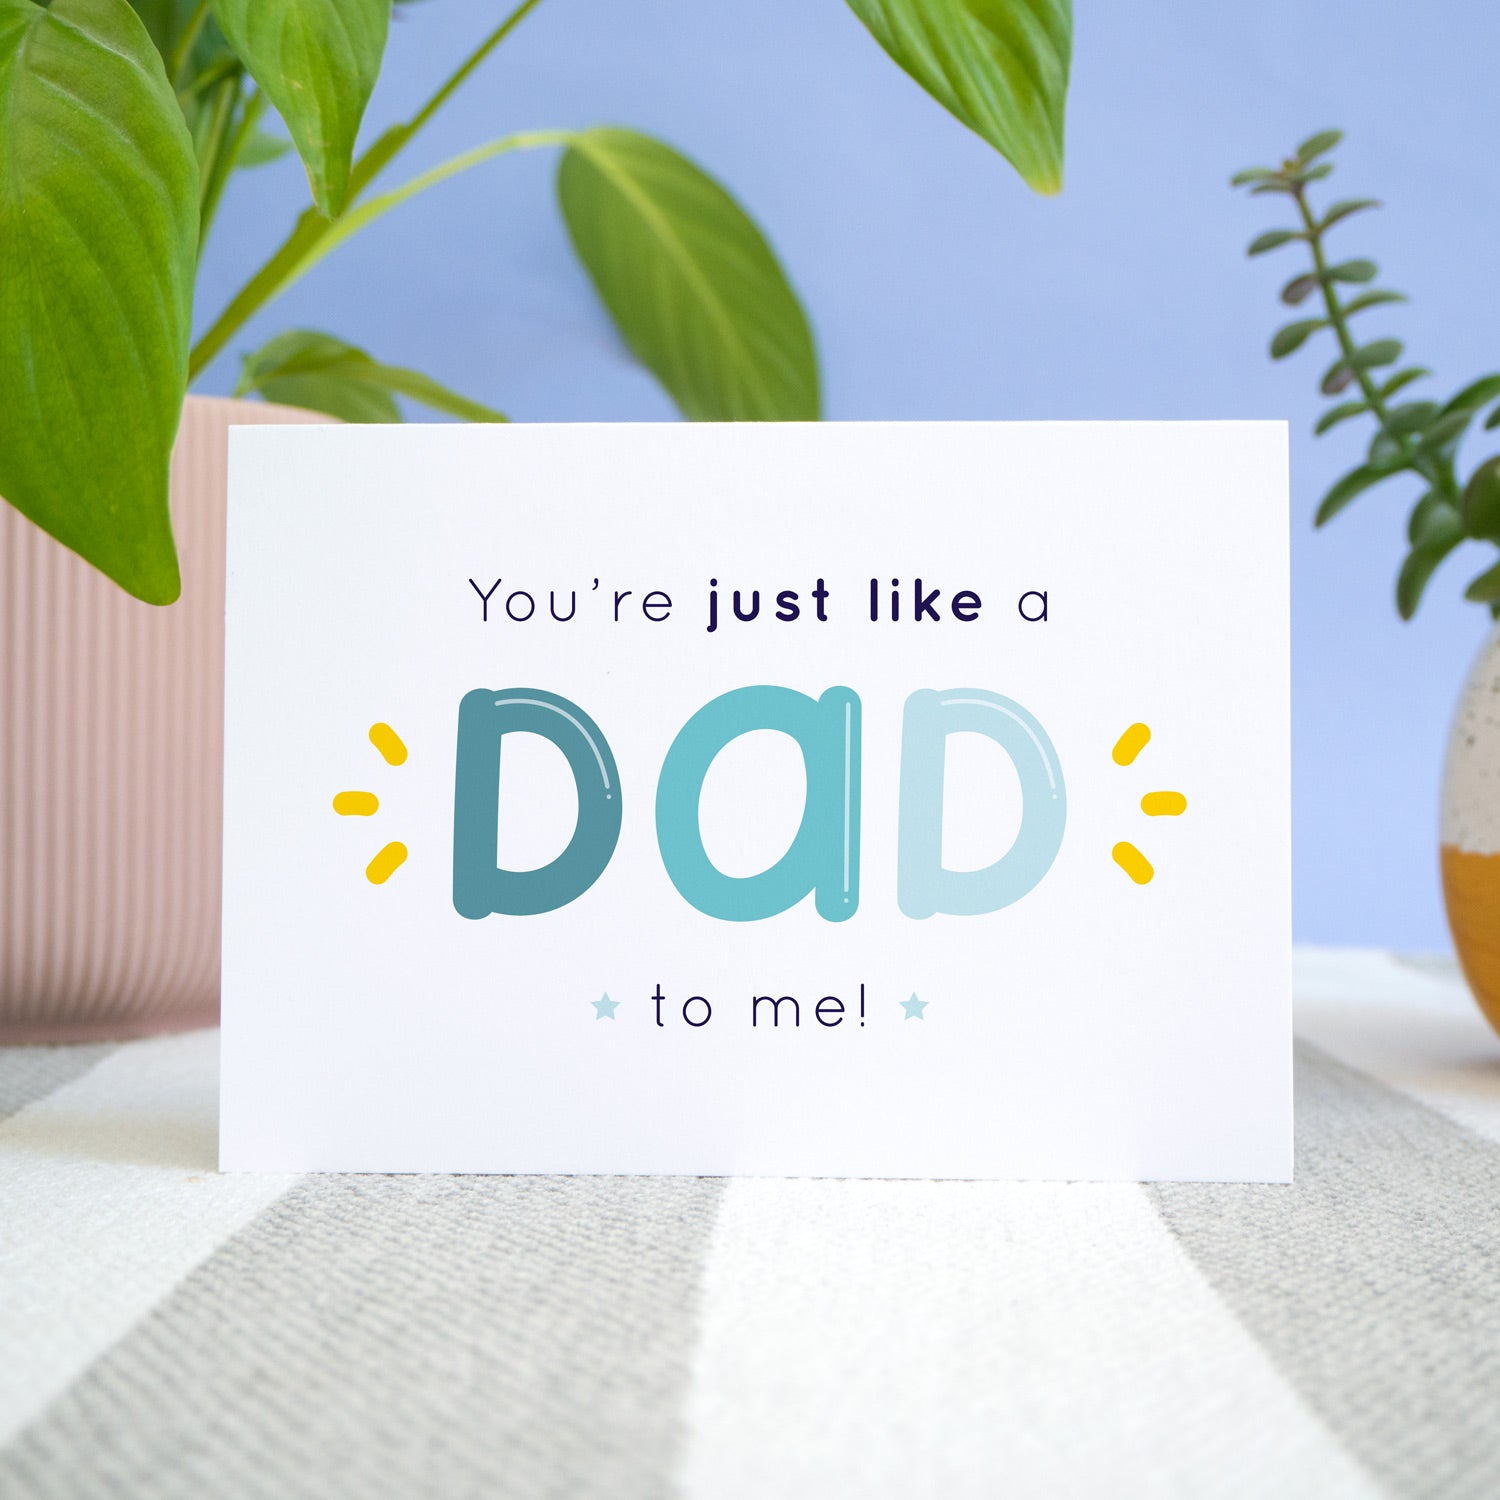 A 'like a dad to me' card shot on a stripy rug with a blue background with potted plants. The card shows the text 'you're just like a dad to me!' in varying tones of blue and navy with yellow flicks.